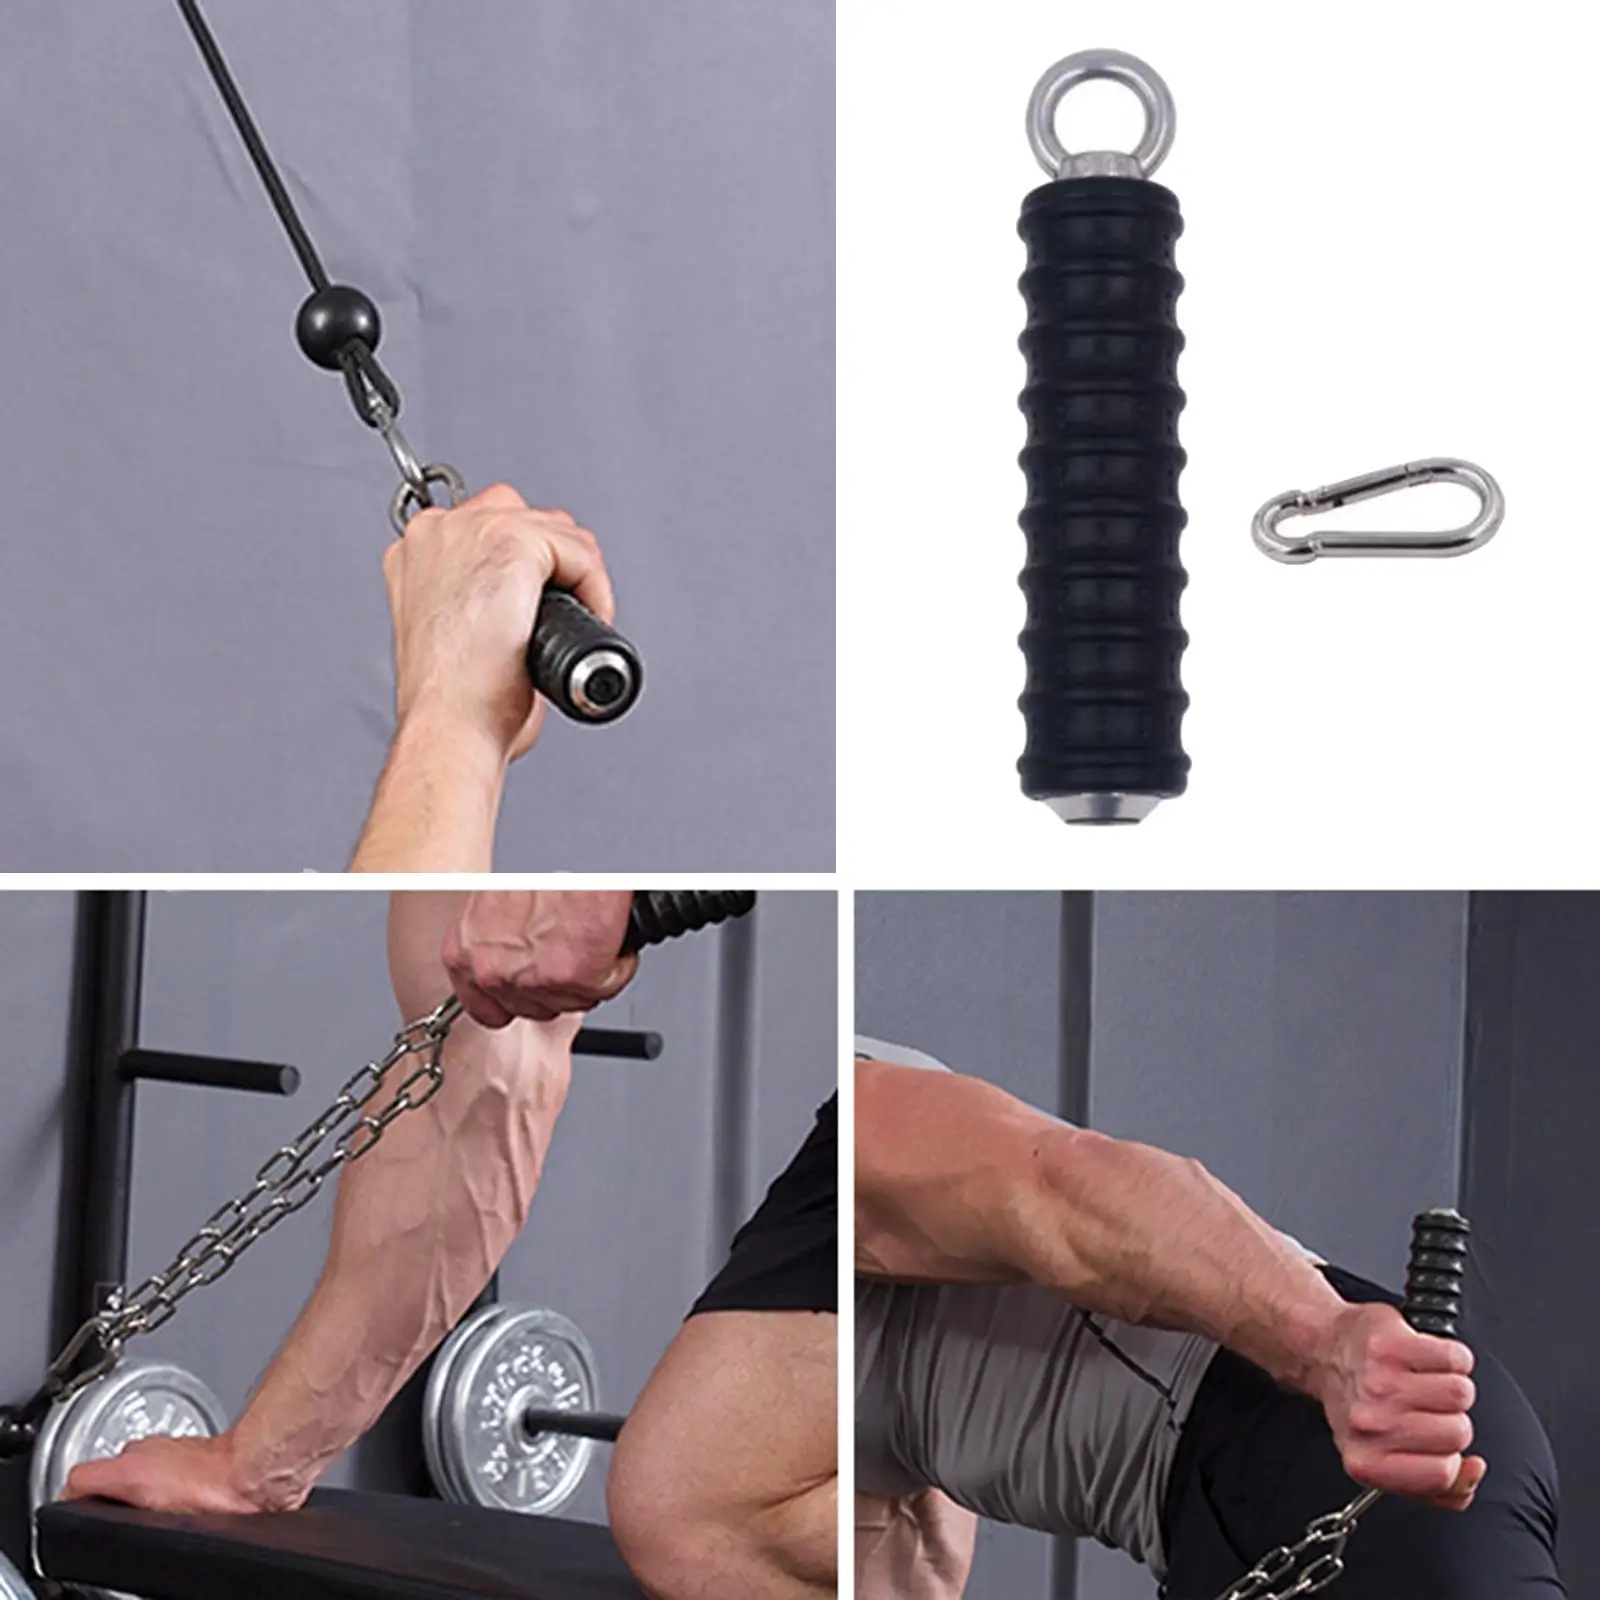 Hand Grips Strength Strength Biceps Back Muscles for